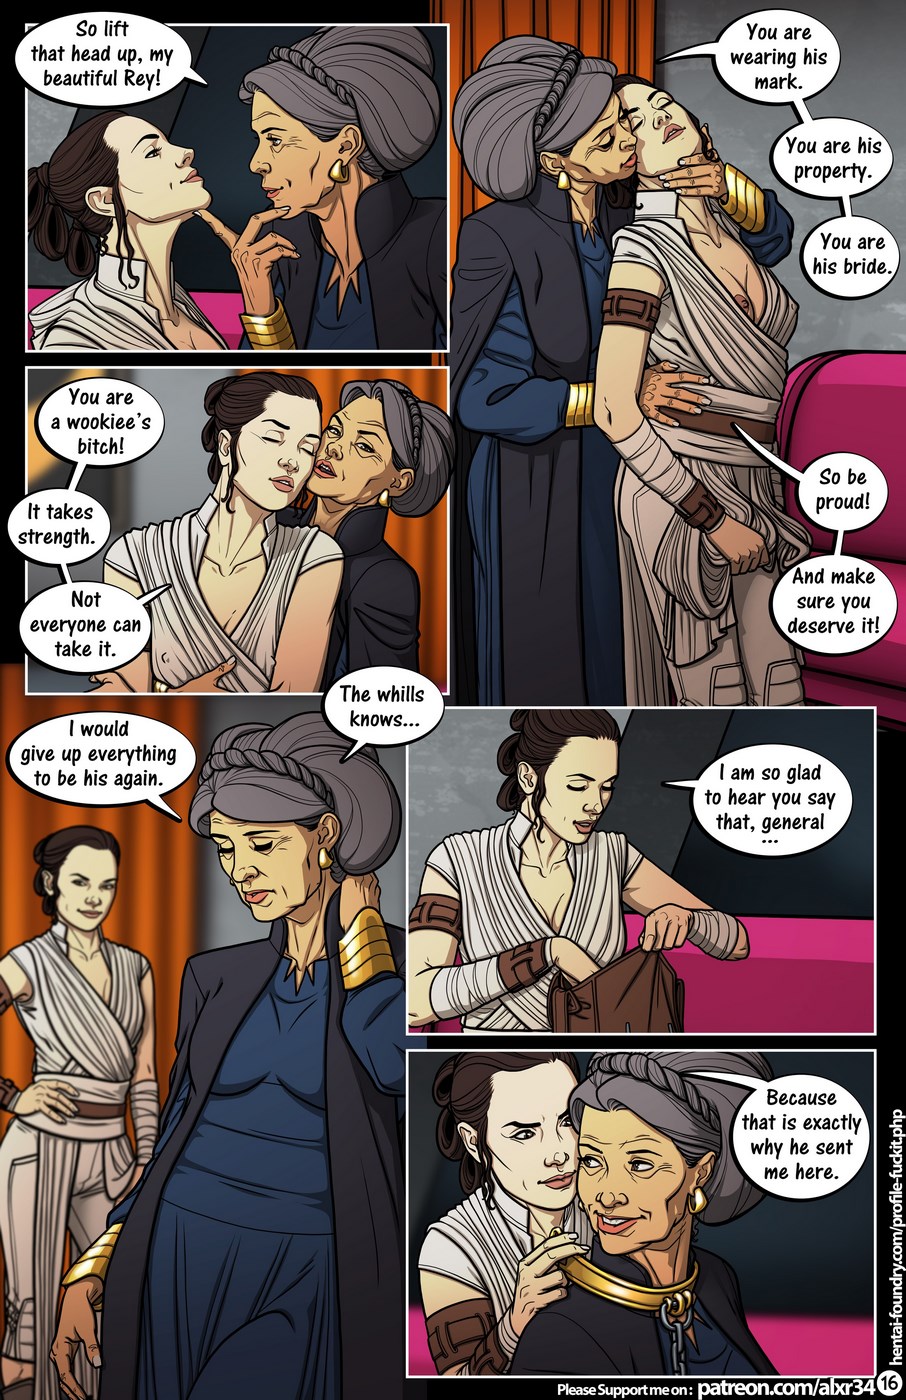 Alx) Star Wars: A Complete Guide to Wookie Sex 3 â€¢ Free Porn Comics